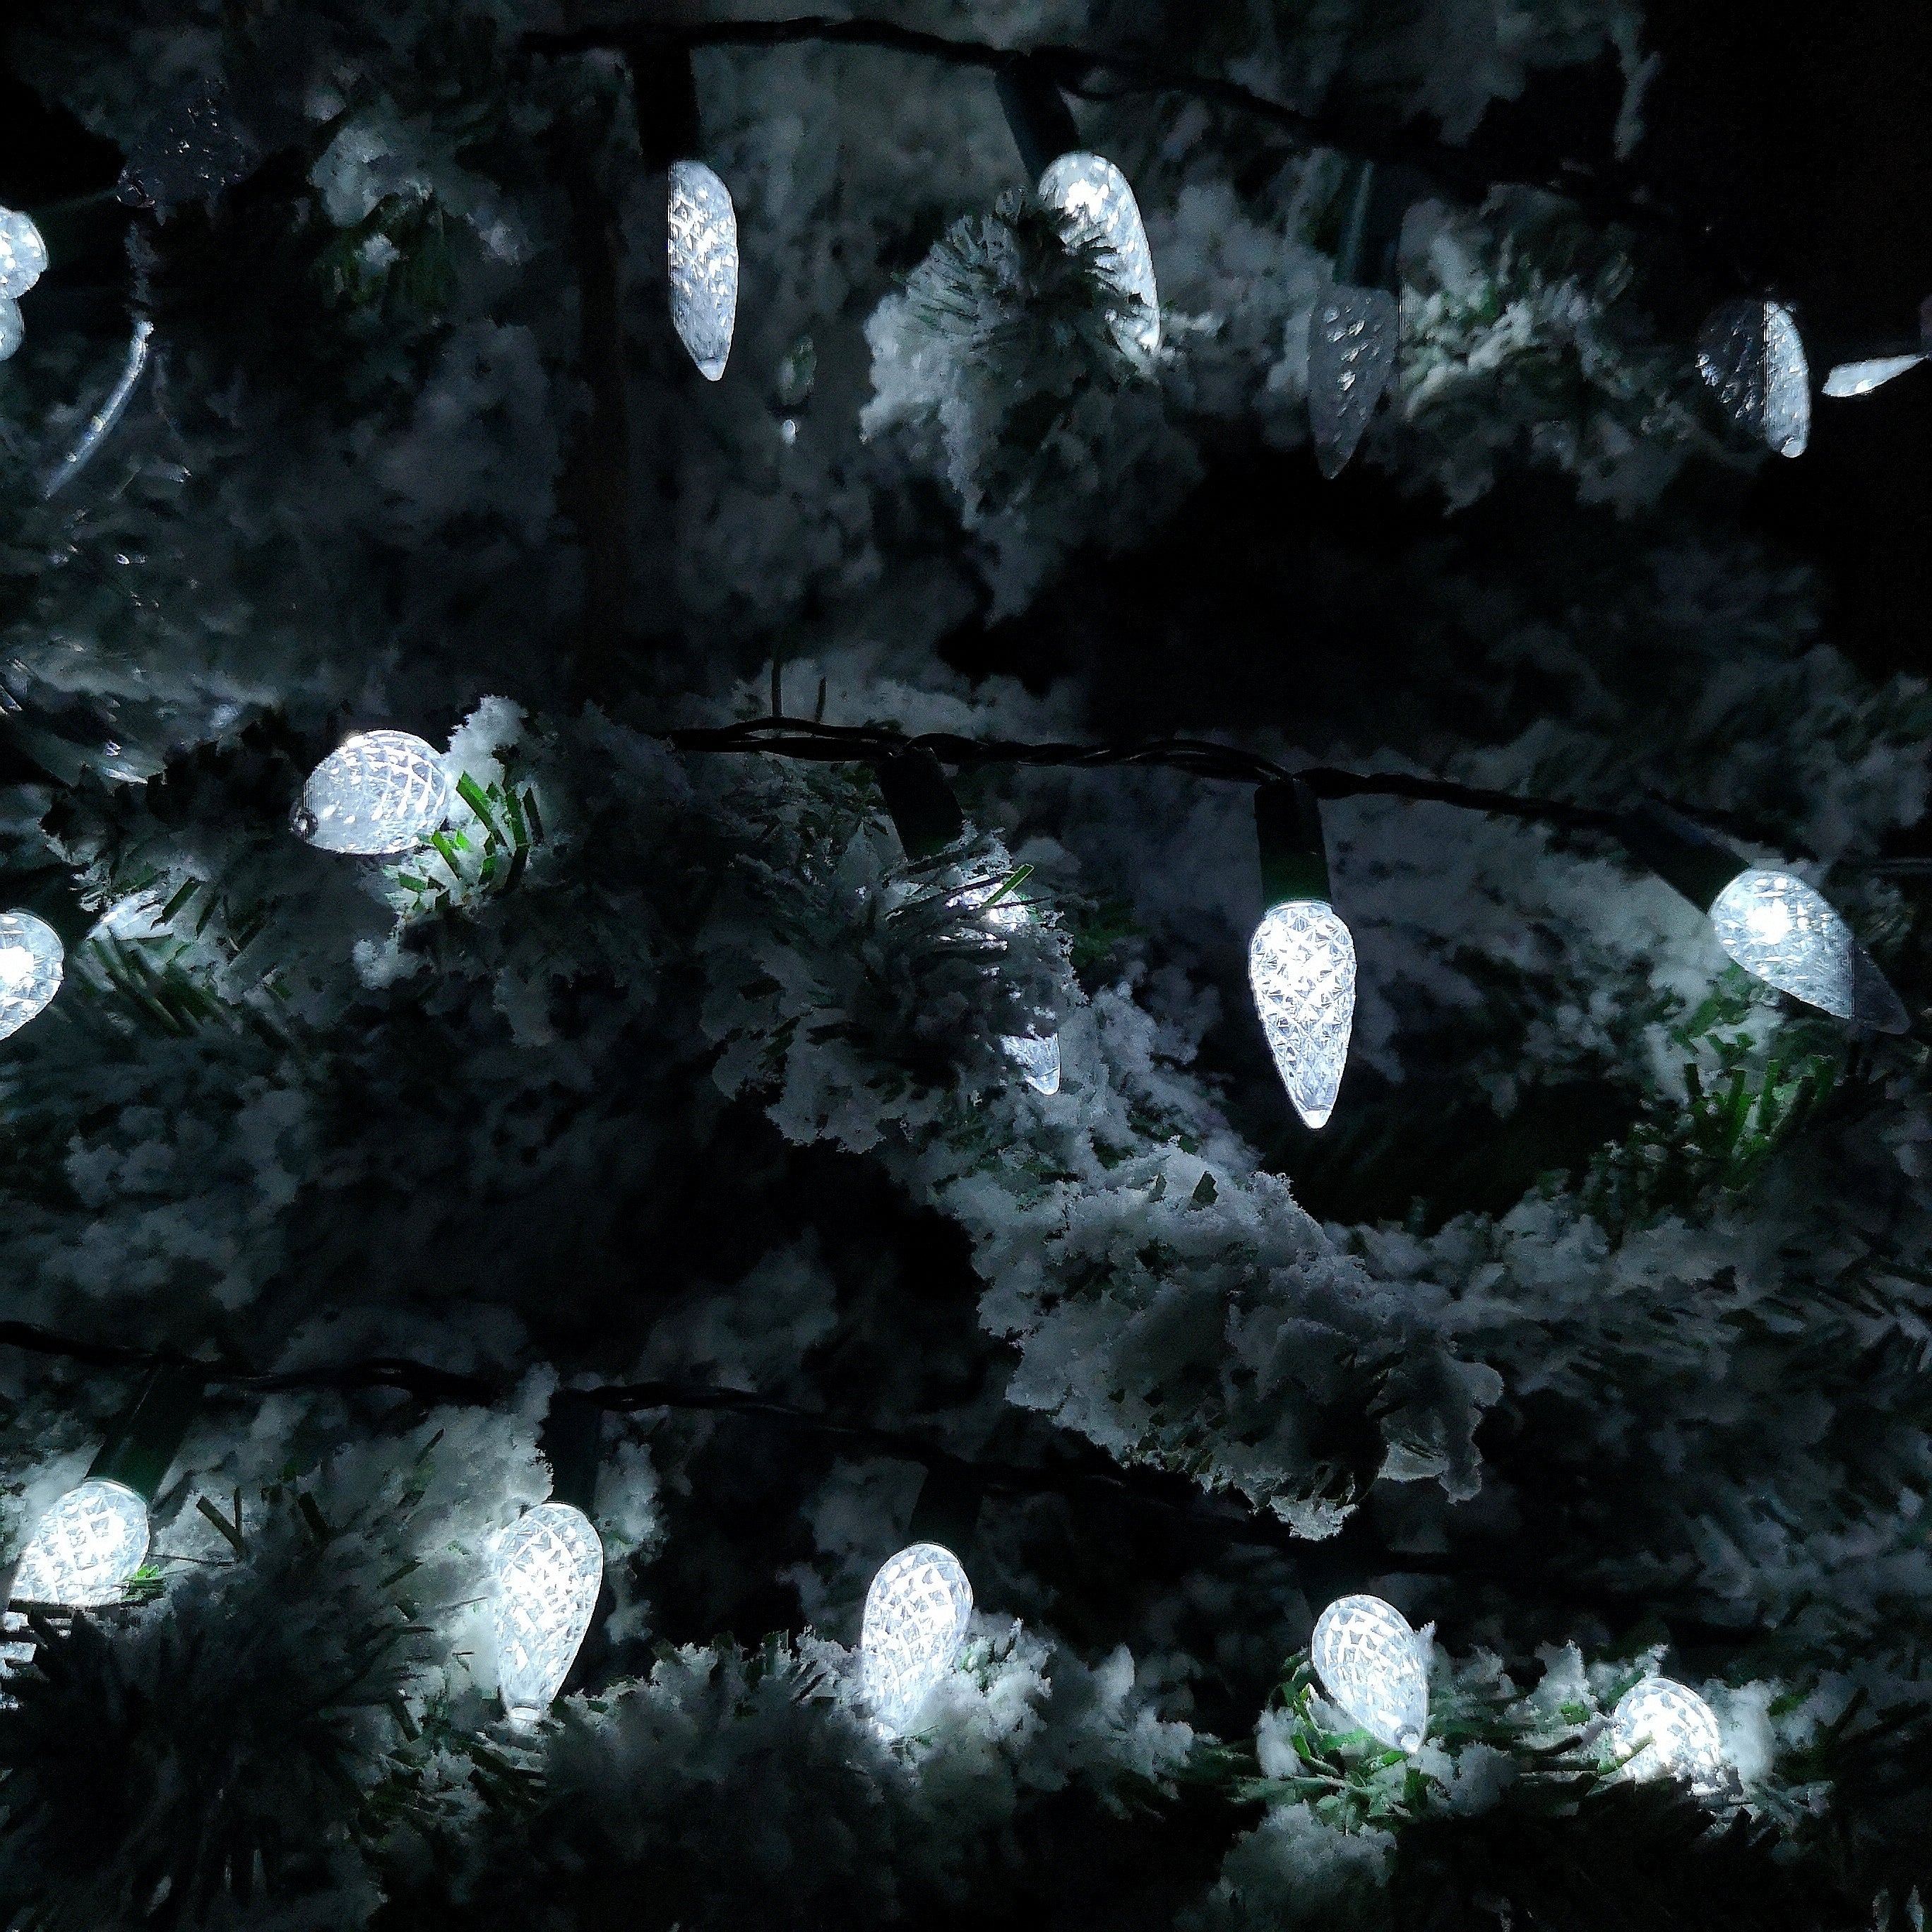 7.5m 150 LED Multi-action Pine Cone Christmas Lights in White